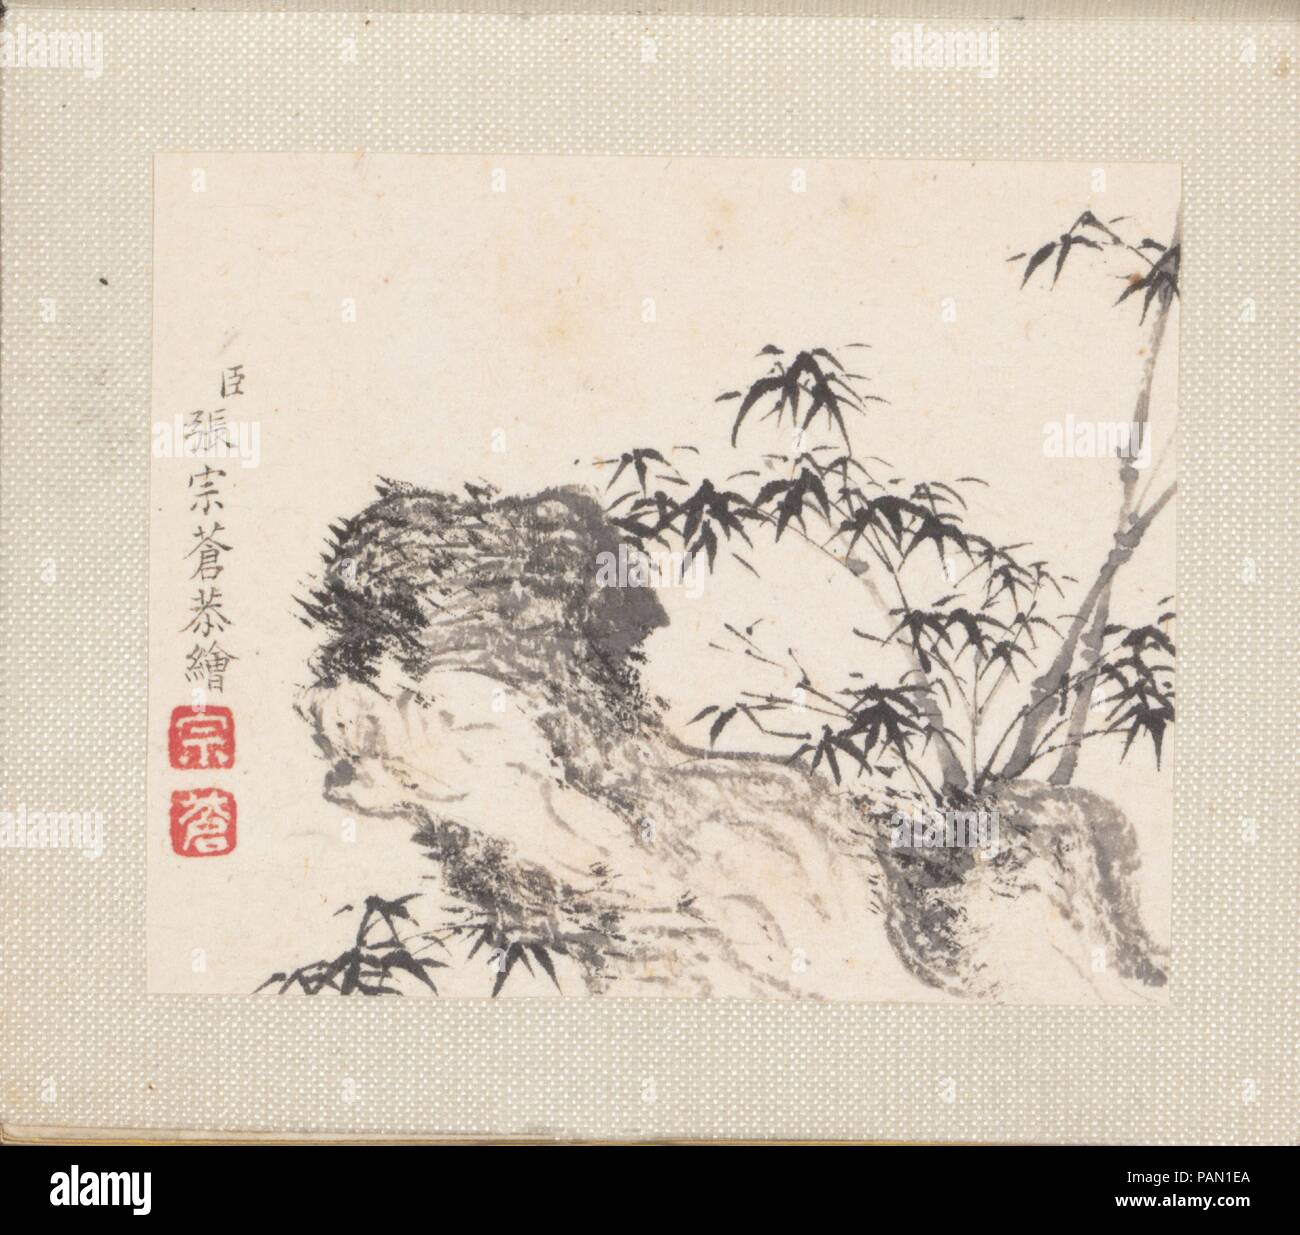 Miniature landscapes. Artist: Zhang Zongcang (Chinese, 1686-1756). Culture: China. Dimensions: 1 7/16 x 1 3/4 in. (3.7 x 4.4 cm). Date: datable to 1751-54.  This tiny album was made for inclusion in a 'treasure box,' one of the elaborate containers of precious objects that were favorites of the Qianlong Emperor (r. 1736-95) of the Qing dynasty (1644-1911). Albums were particularly well-suited to satisfying Qianlong's love of miniatures, but court painters like Zhang Zongcang were also required to produce tiny handscrolls for treasure boxes. Museum: Metropolitan Museum of Art, New York, USA. Stock Photo